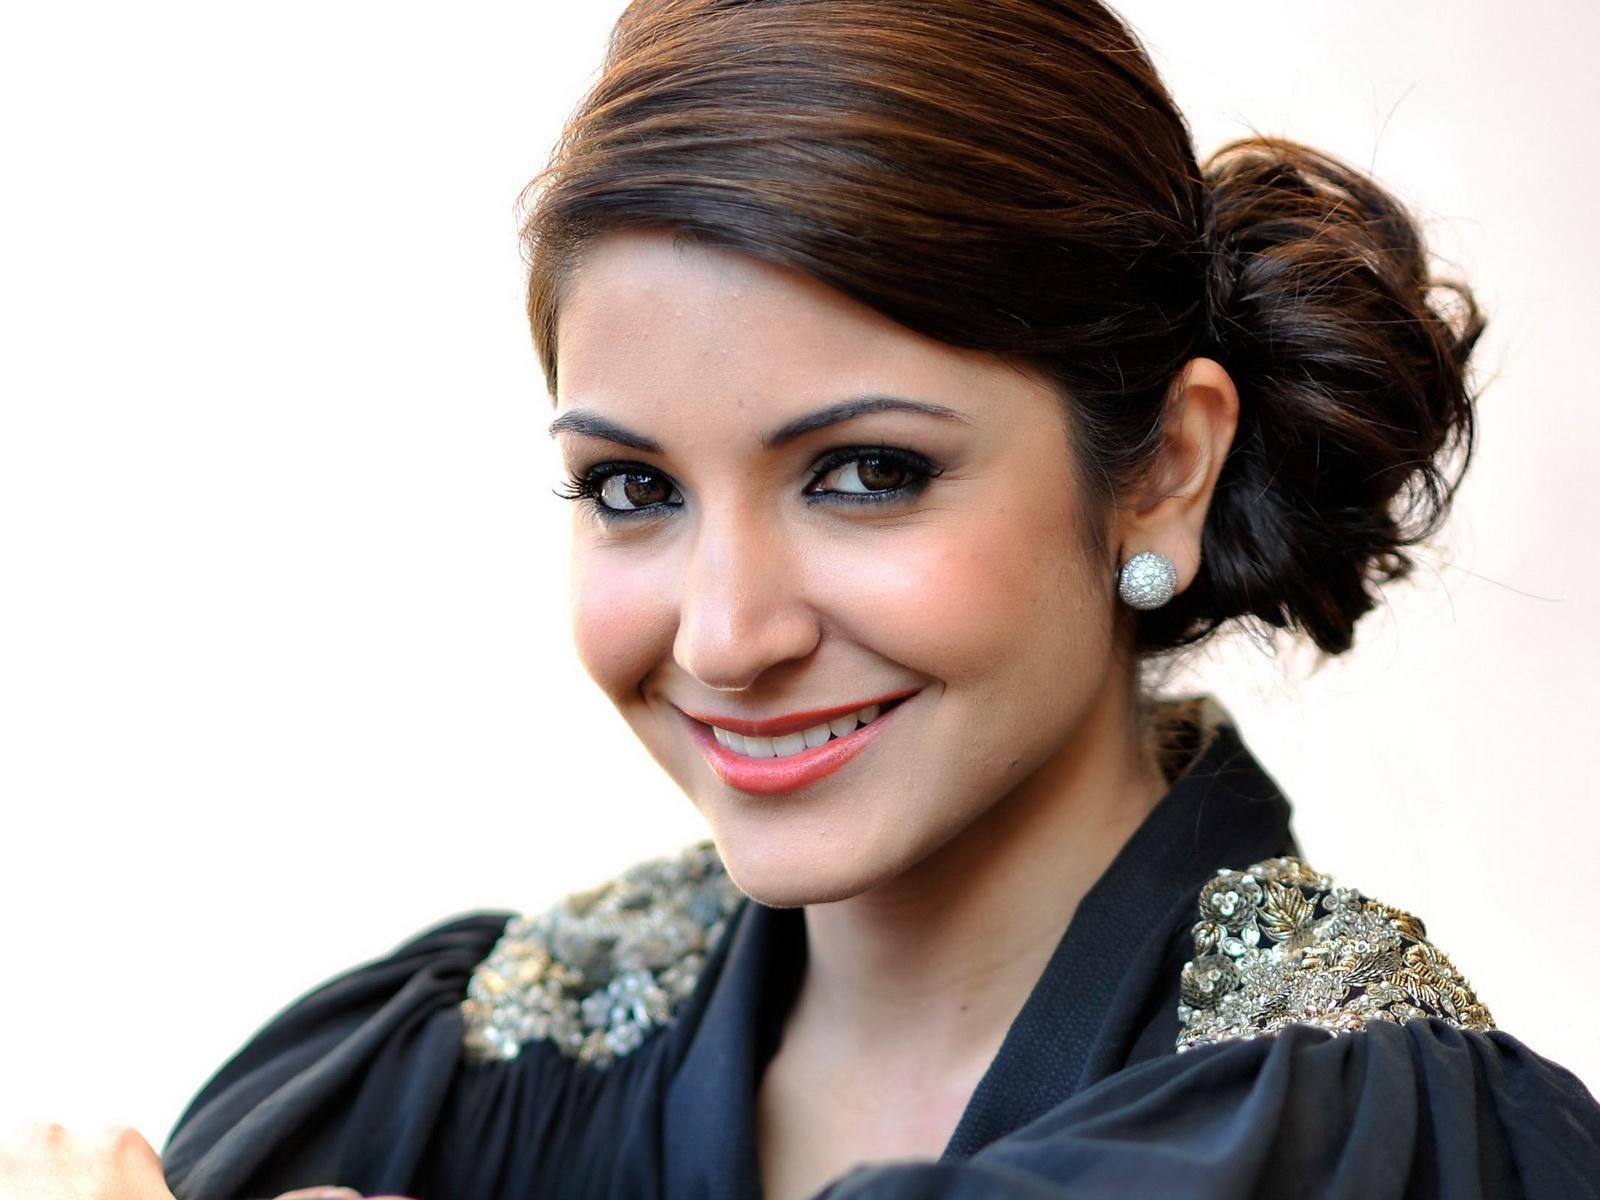 Anushka Sharma is on fire in her latest magazine cover